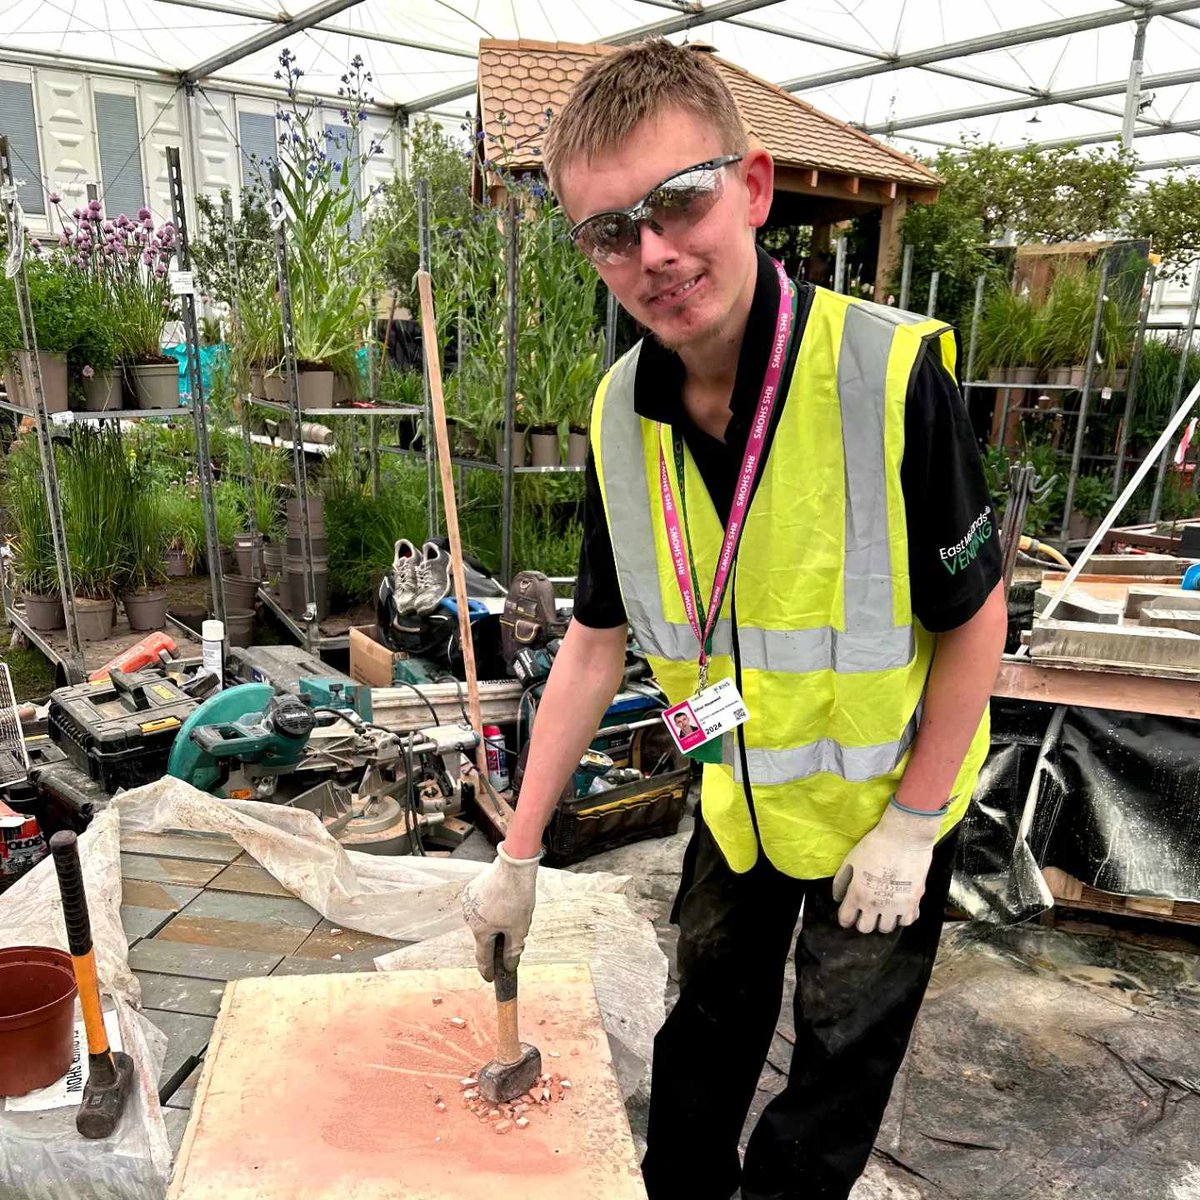 Don't forget to vote for the 'Pulp Friction Growing Skills Garden' for People's Choice Award in the Sanctuary Gardens/ All About Plants category! rhs.org.uk/chelseapeoples…

#pulpfrictioncic #InclusionMatters #InclusiveWorkforce #rhschelseaflowershow #RHSChelsea